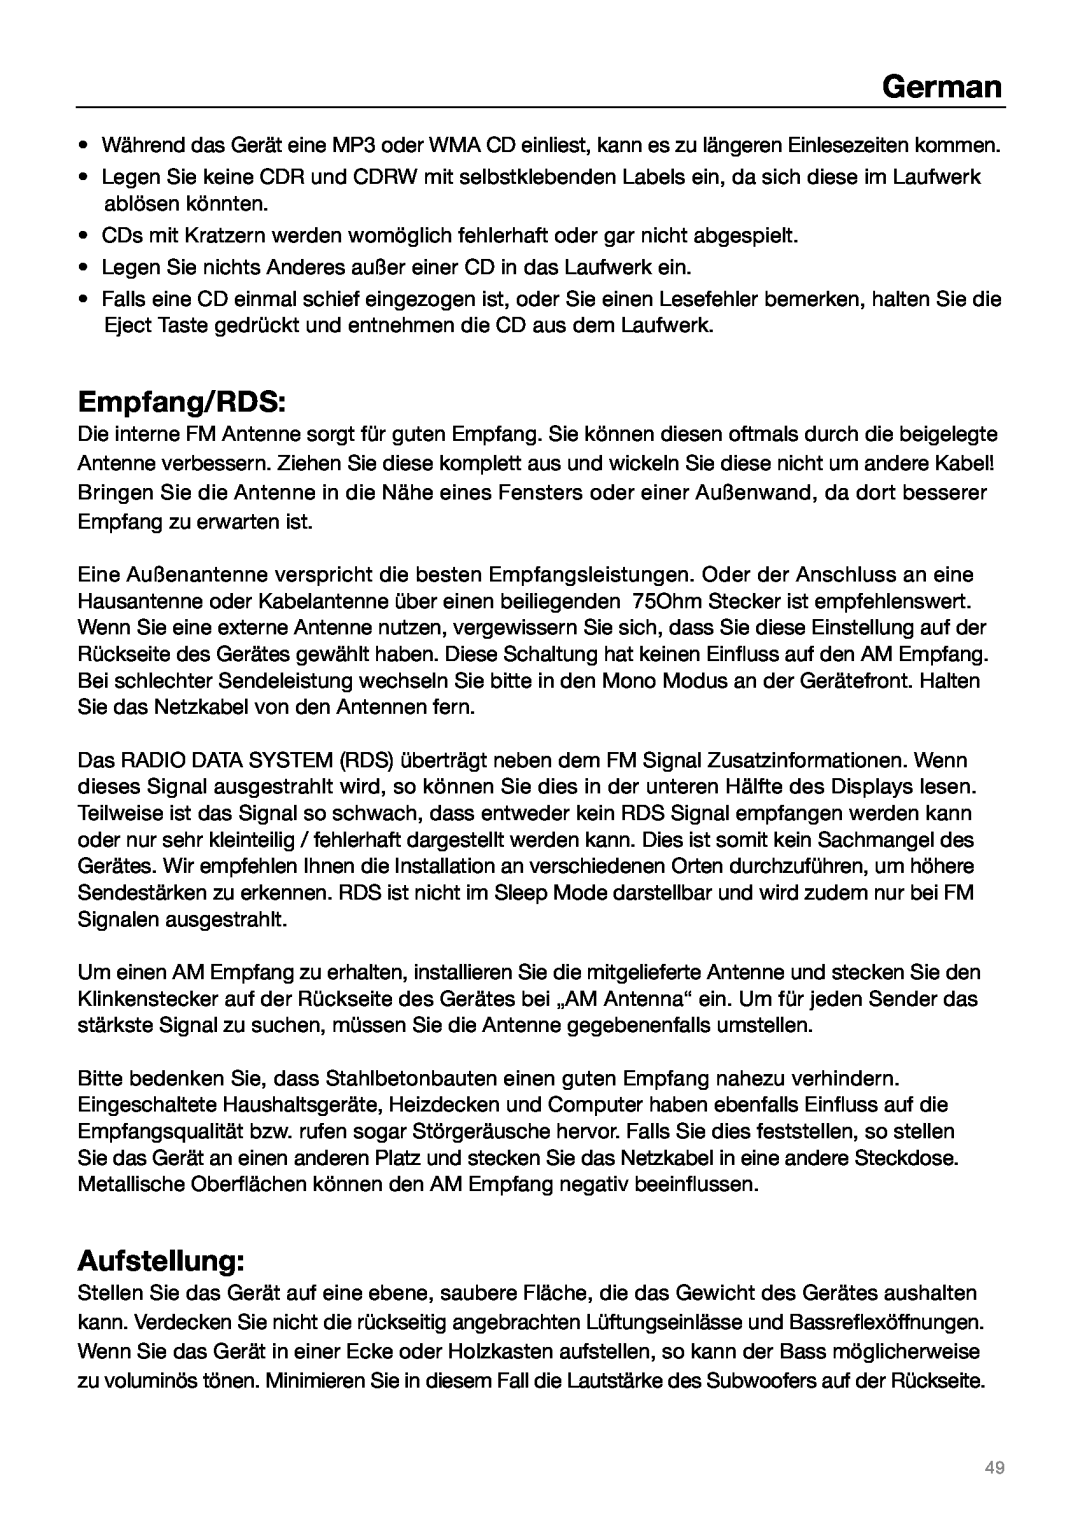 Tivoli Audio MUSIC SYSTEM owner manual Empfang/RDS, Aufstellung, German 